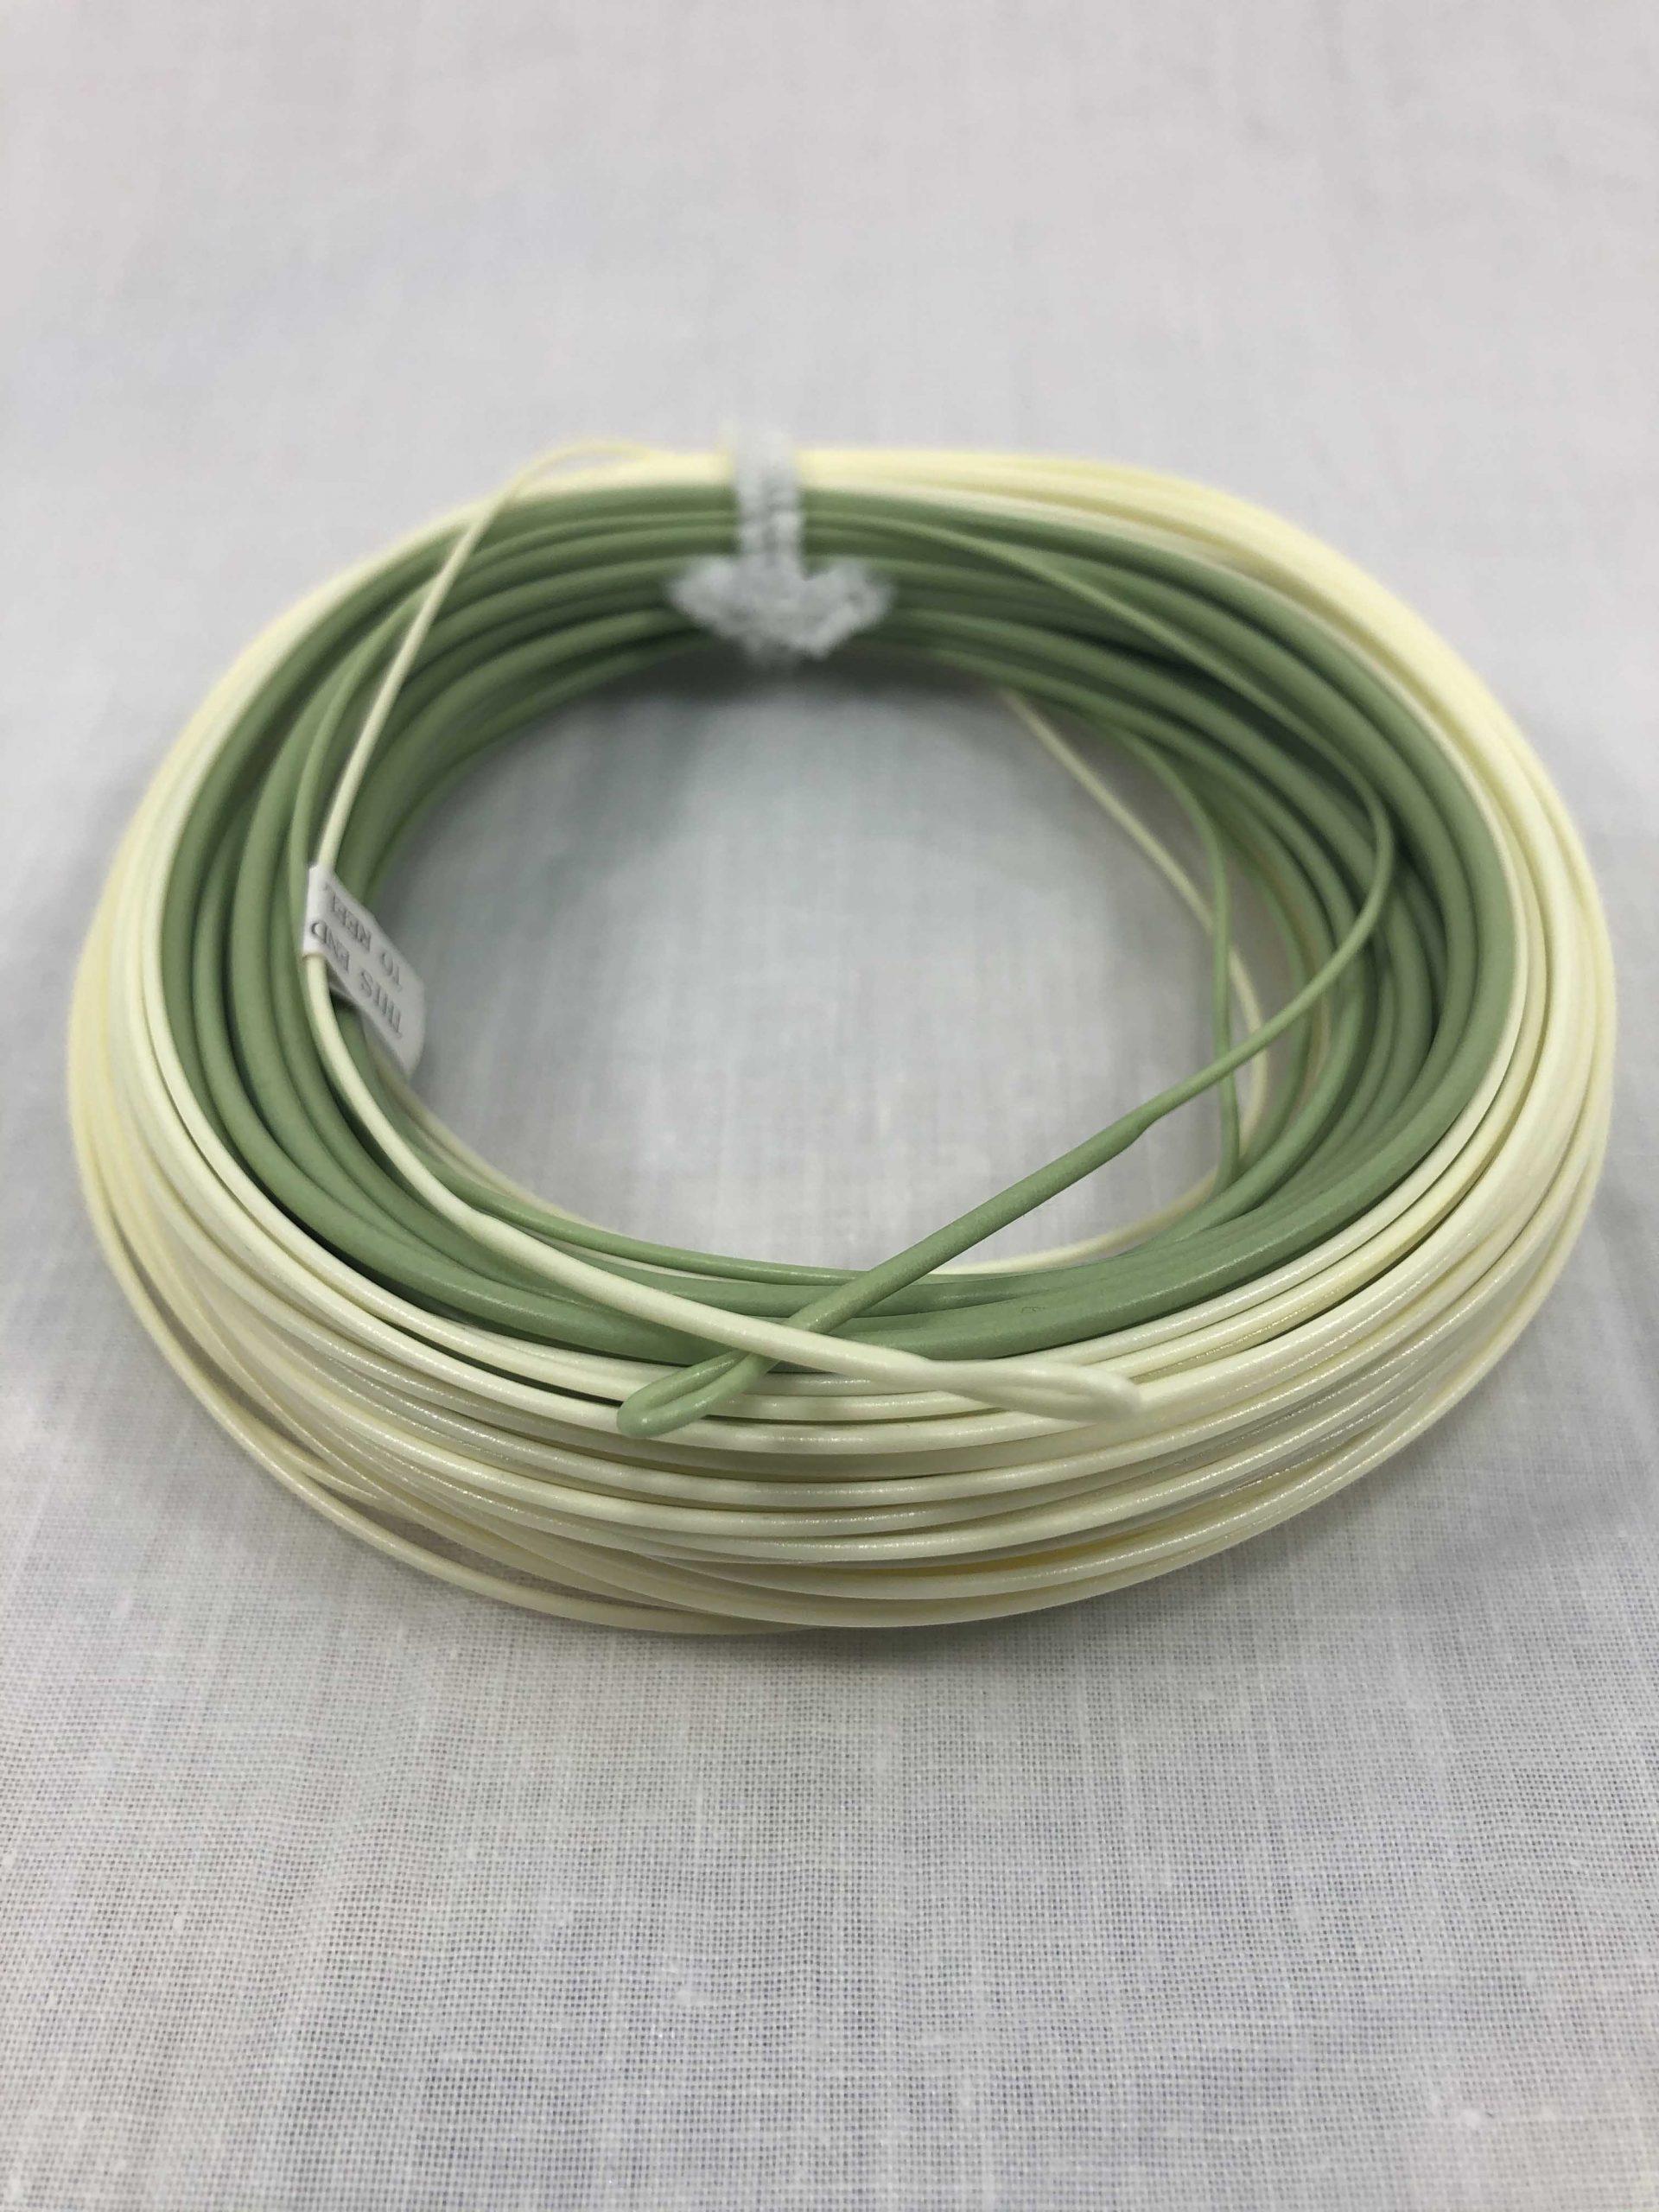 20 ea* The Mega Gold fly line is - Predator Fly Fishing